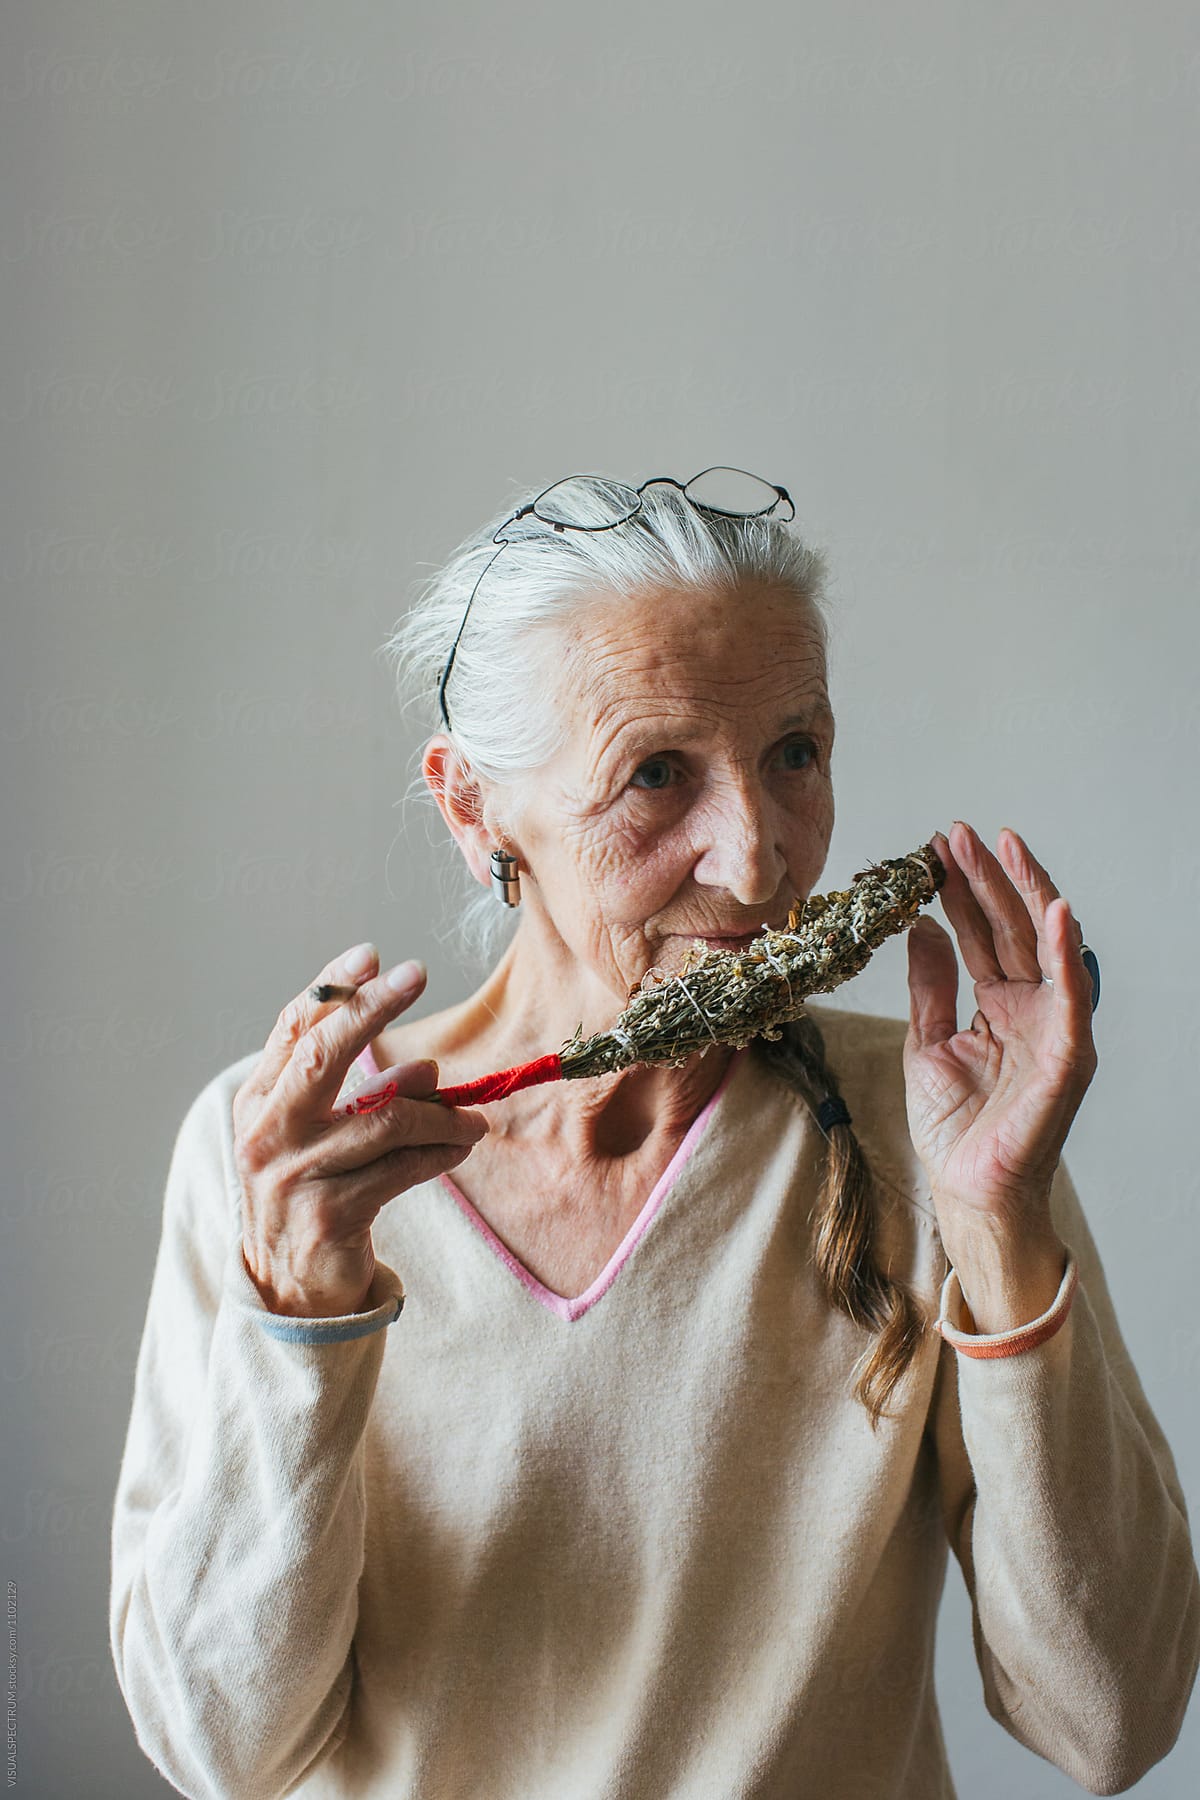 Indoor Portrait of Senior Smoking Woman with Grey Hair Smelling Self-Made Smudge Stick